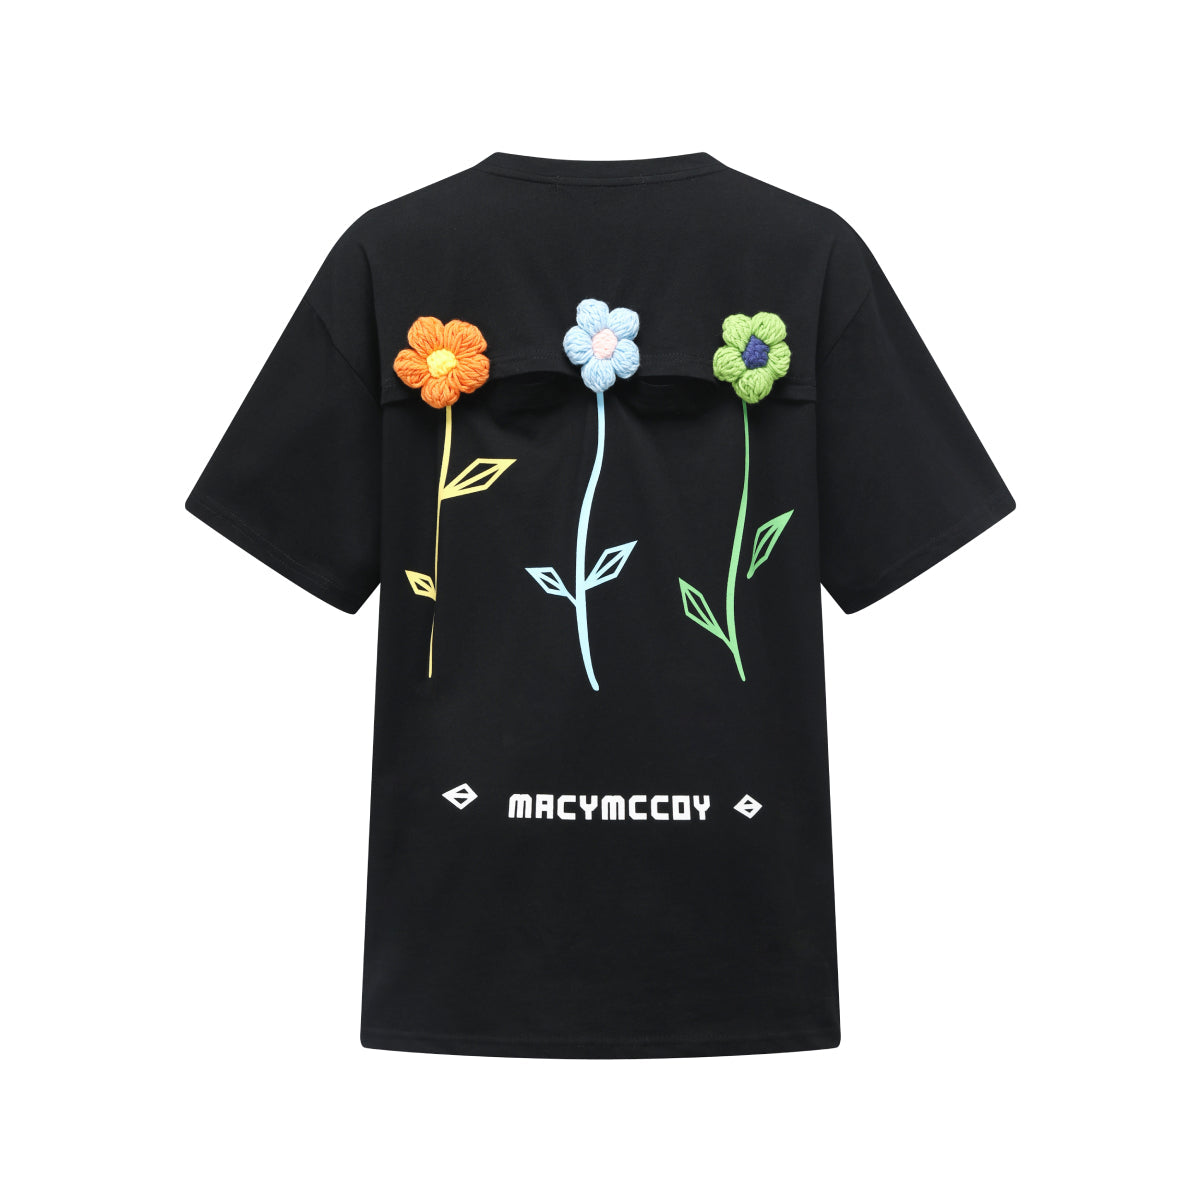 MacyMccoy Flower Hollow Out Tee